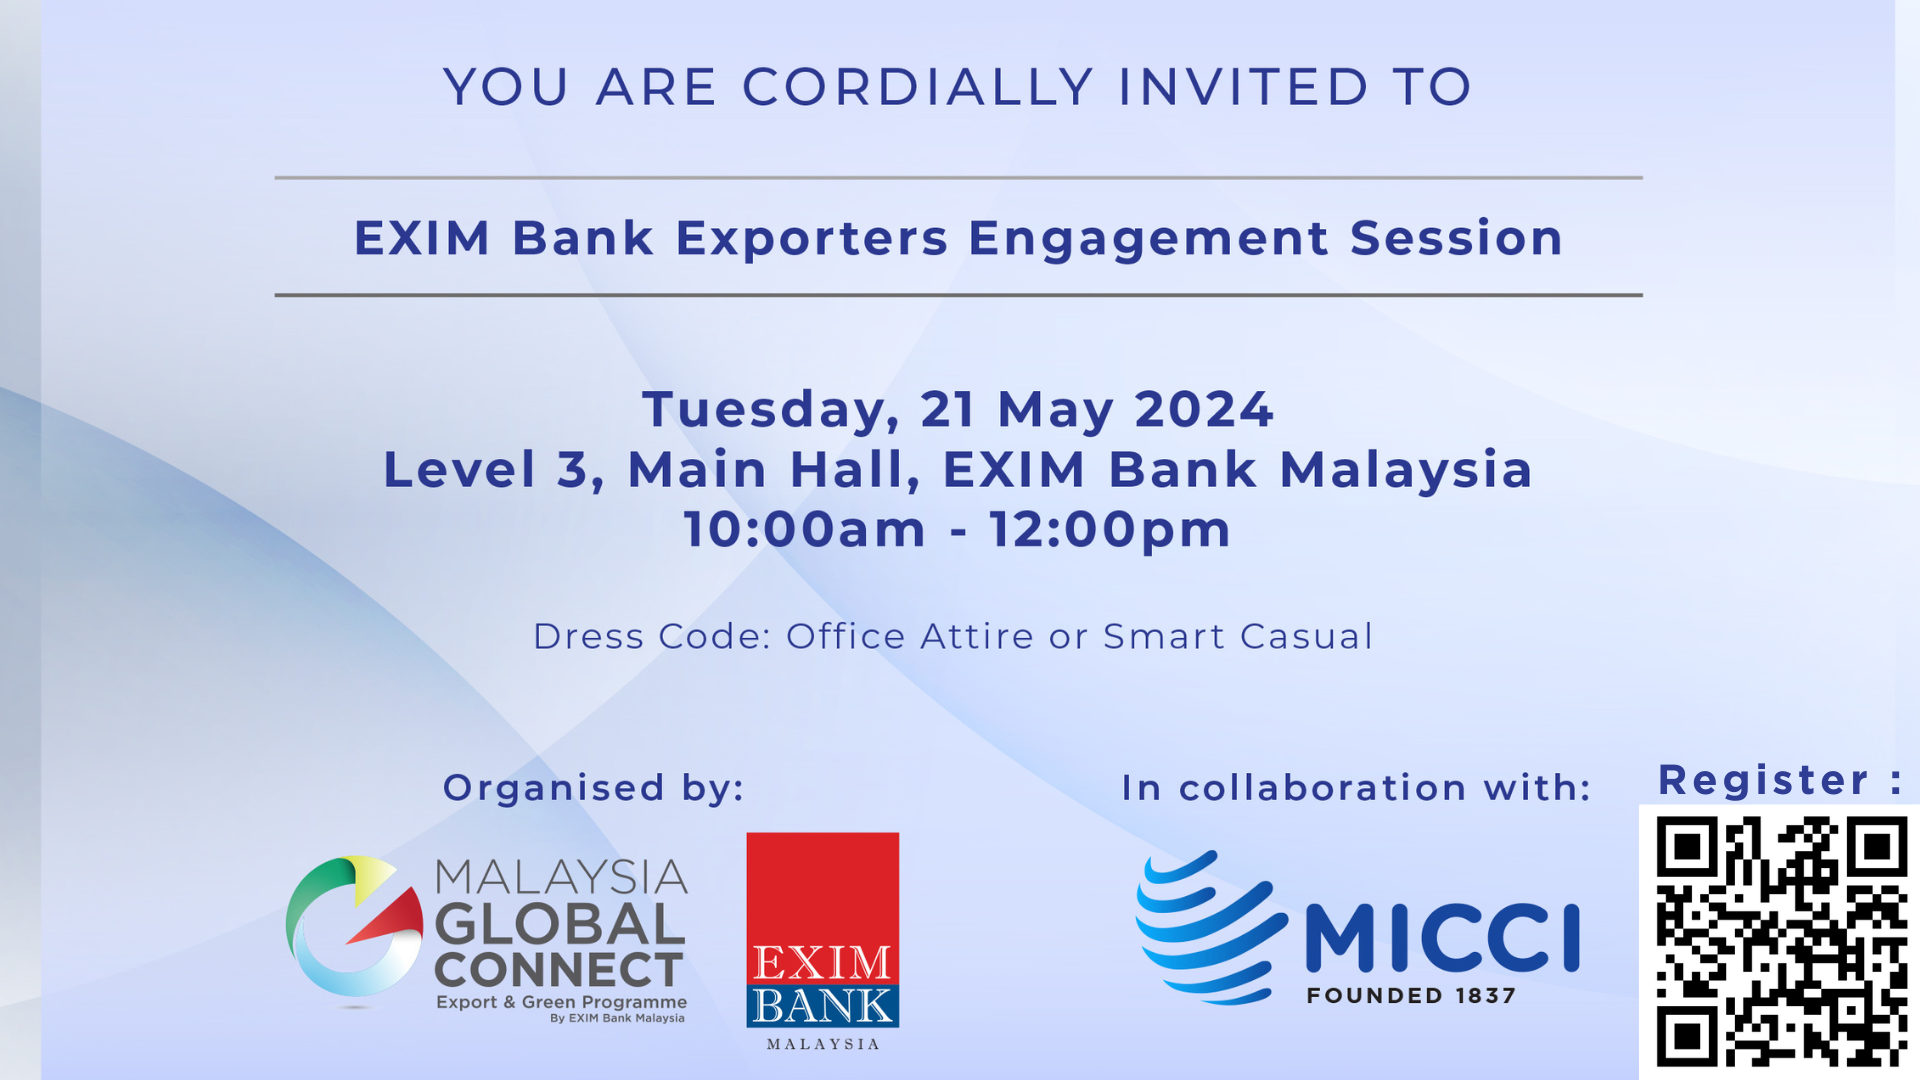 EXIM Bank Exporter’s Engagement Session